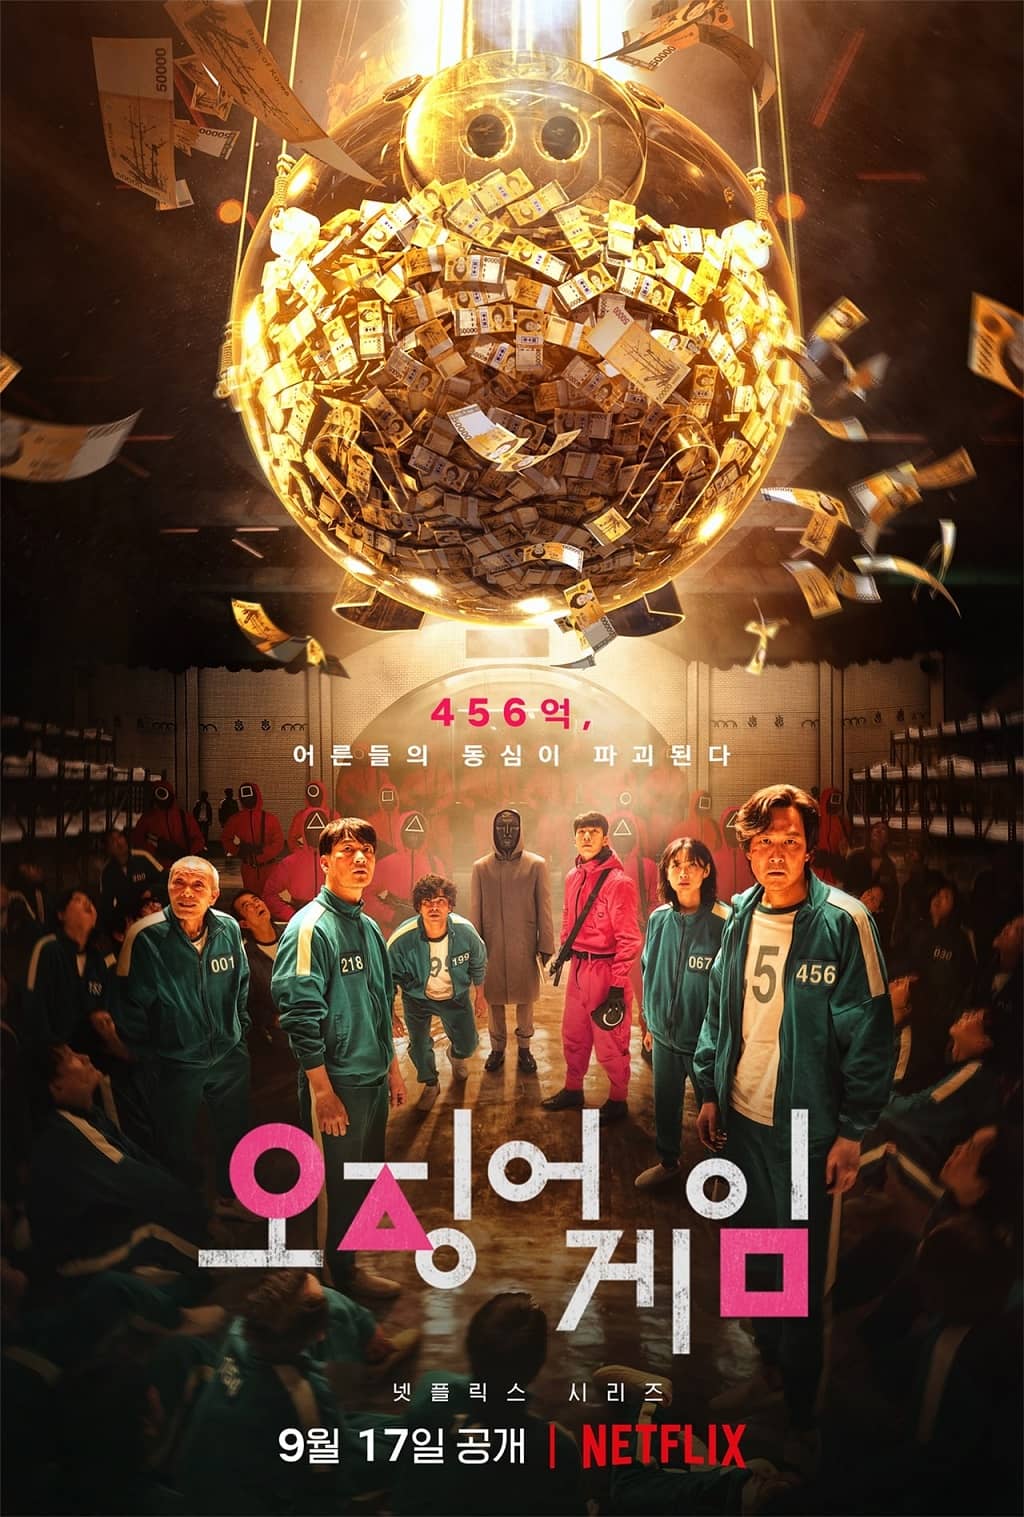 Netflix’s Upcoming Kdrama “Squid Game” Reveals Main Poster + Confirms